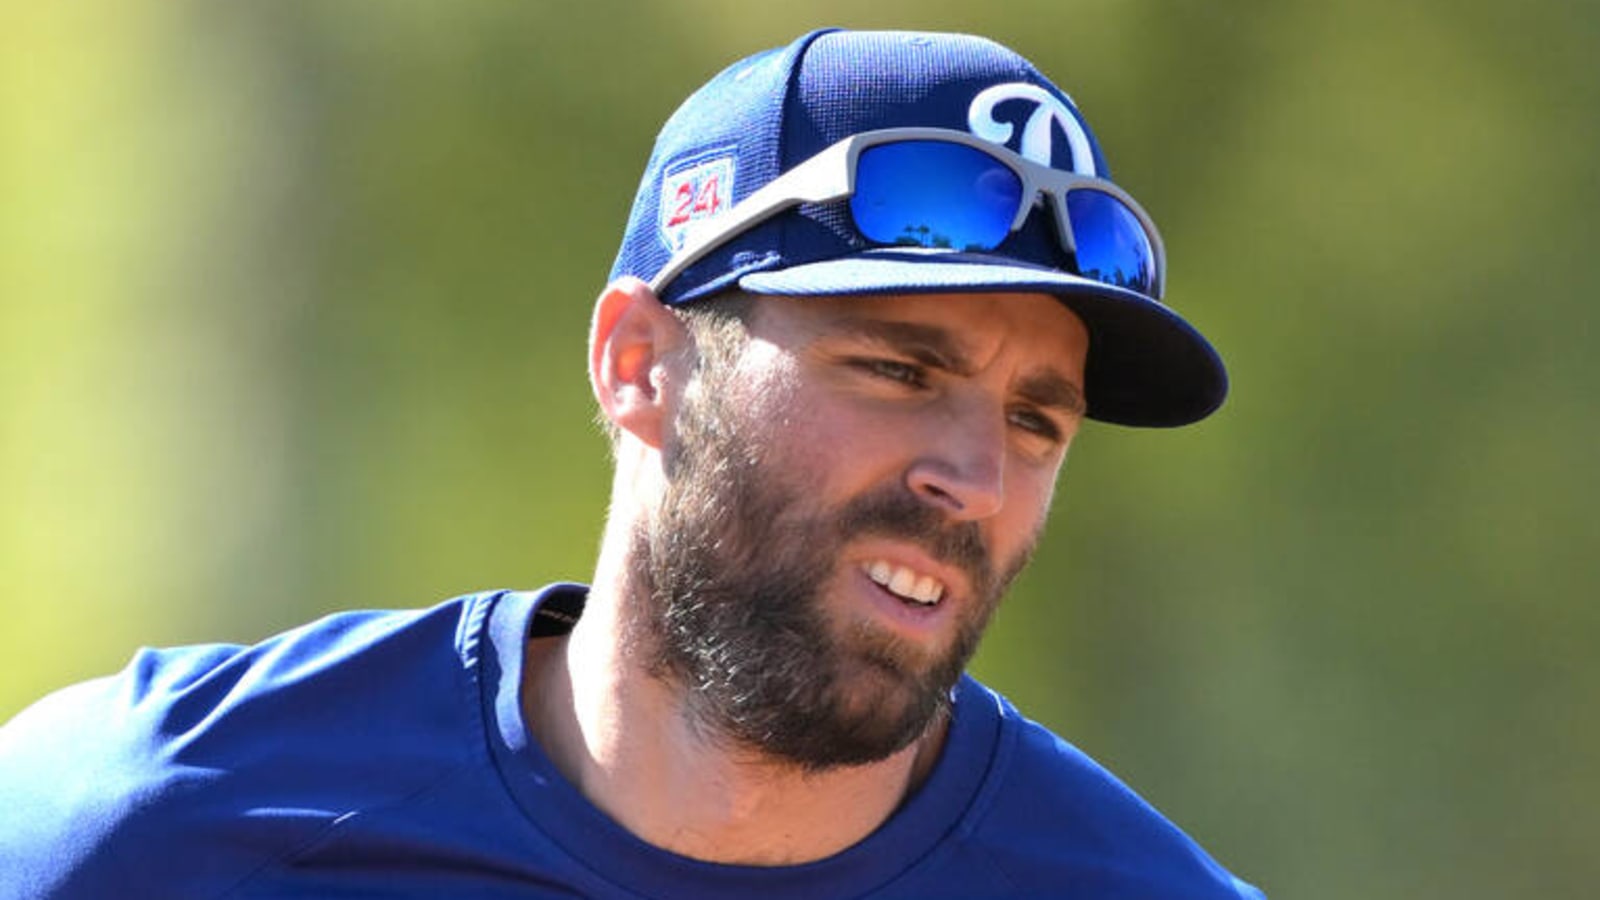 Dodgers Seoul Series Video: Chris Taylor, Jason Heyward & More From Workout